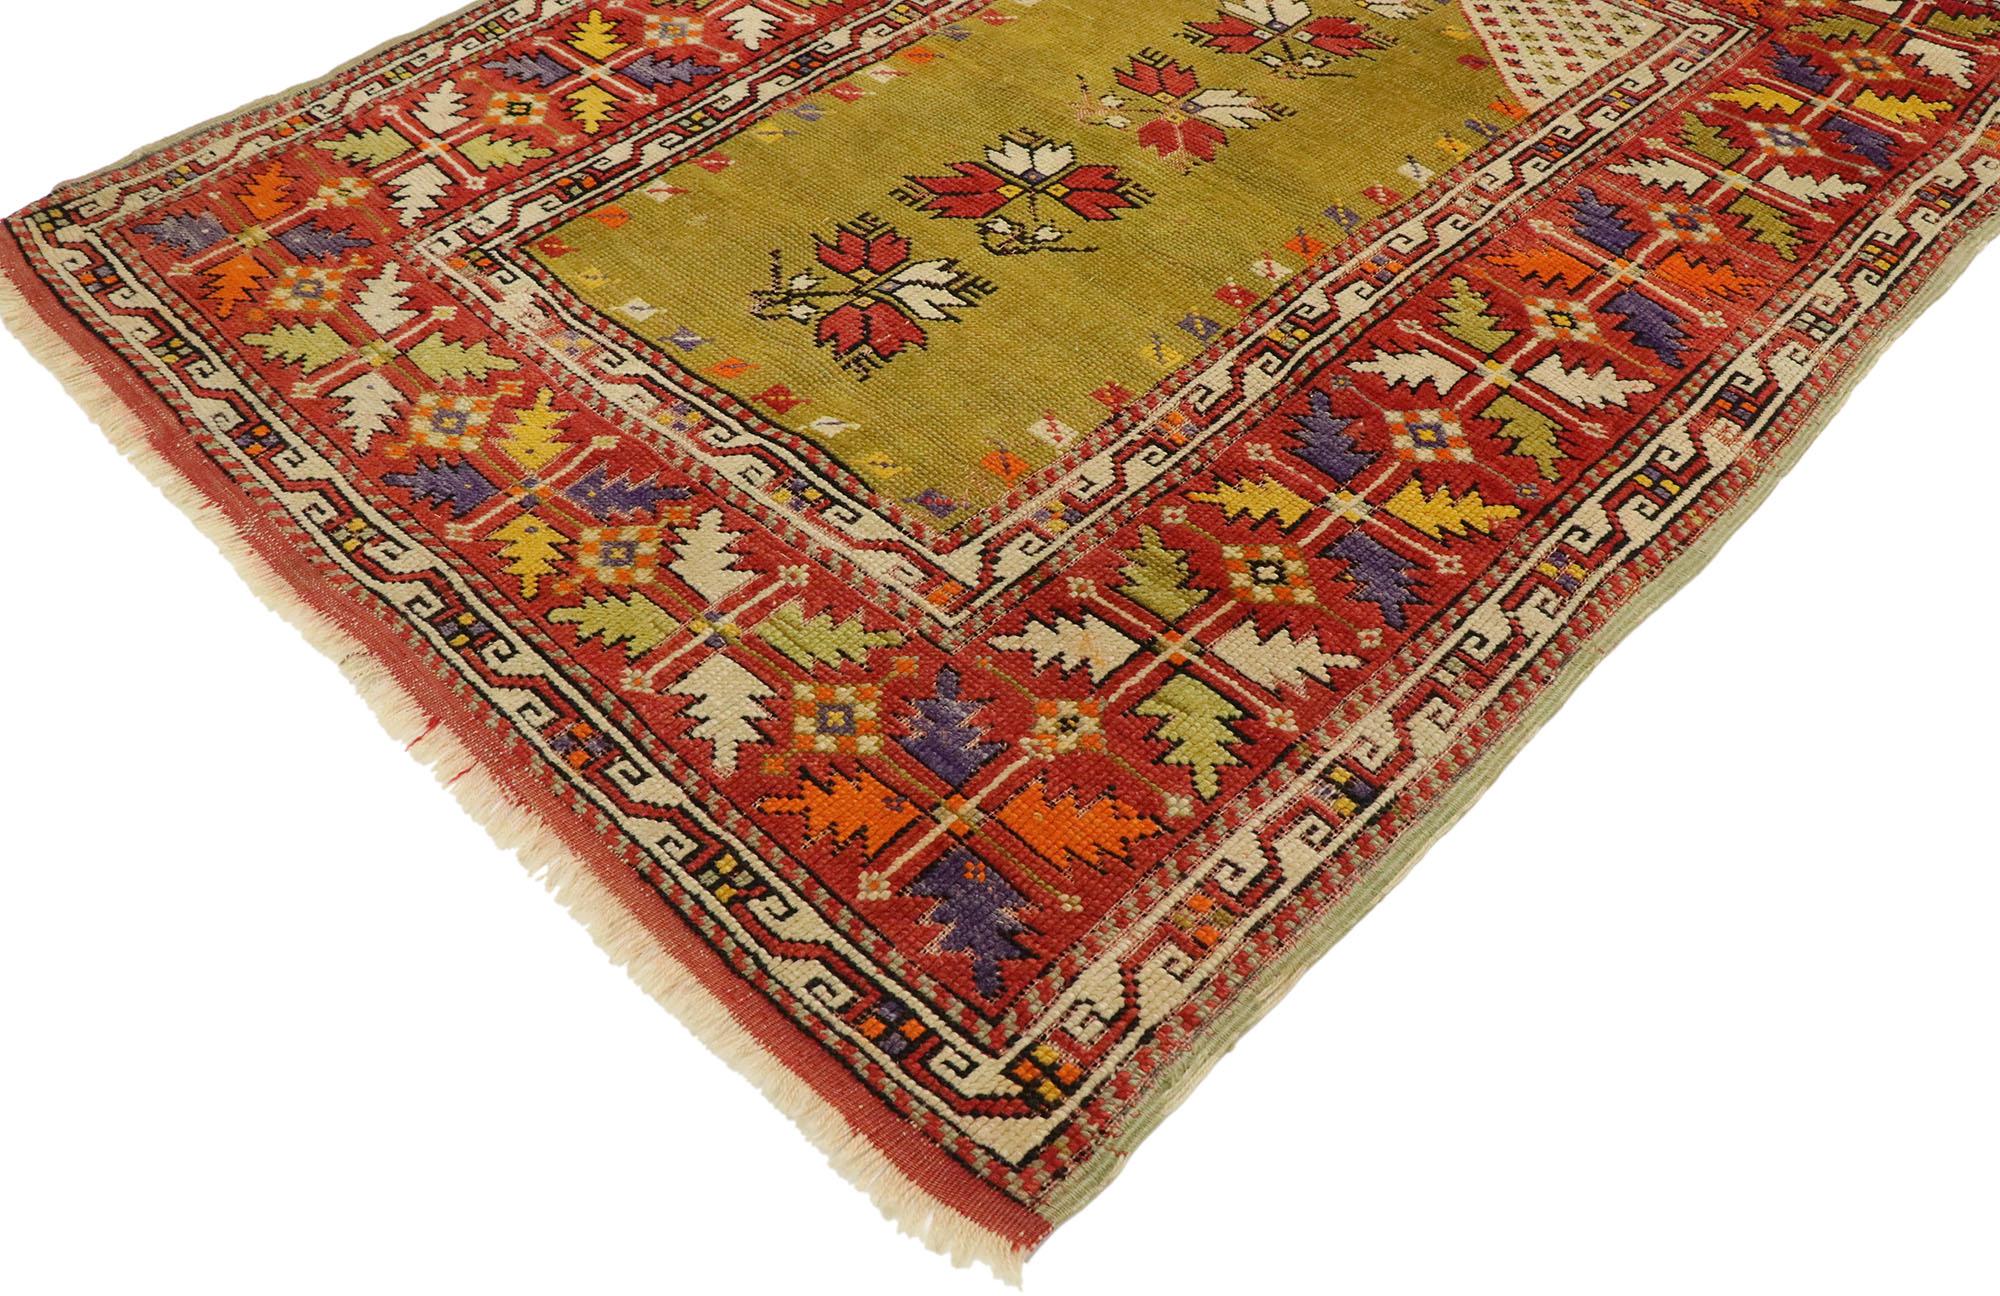 53103 vintage Turkish Oushak Prayer rug with craftsman style. With its luminous warm hues and beguiling beauty, this hand knotted wool vintage Turkish Oushak prayer rug is immersed in Anatolian history. It features a mihrab niche highlighting four